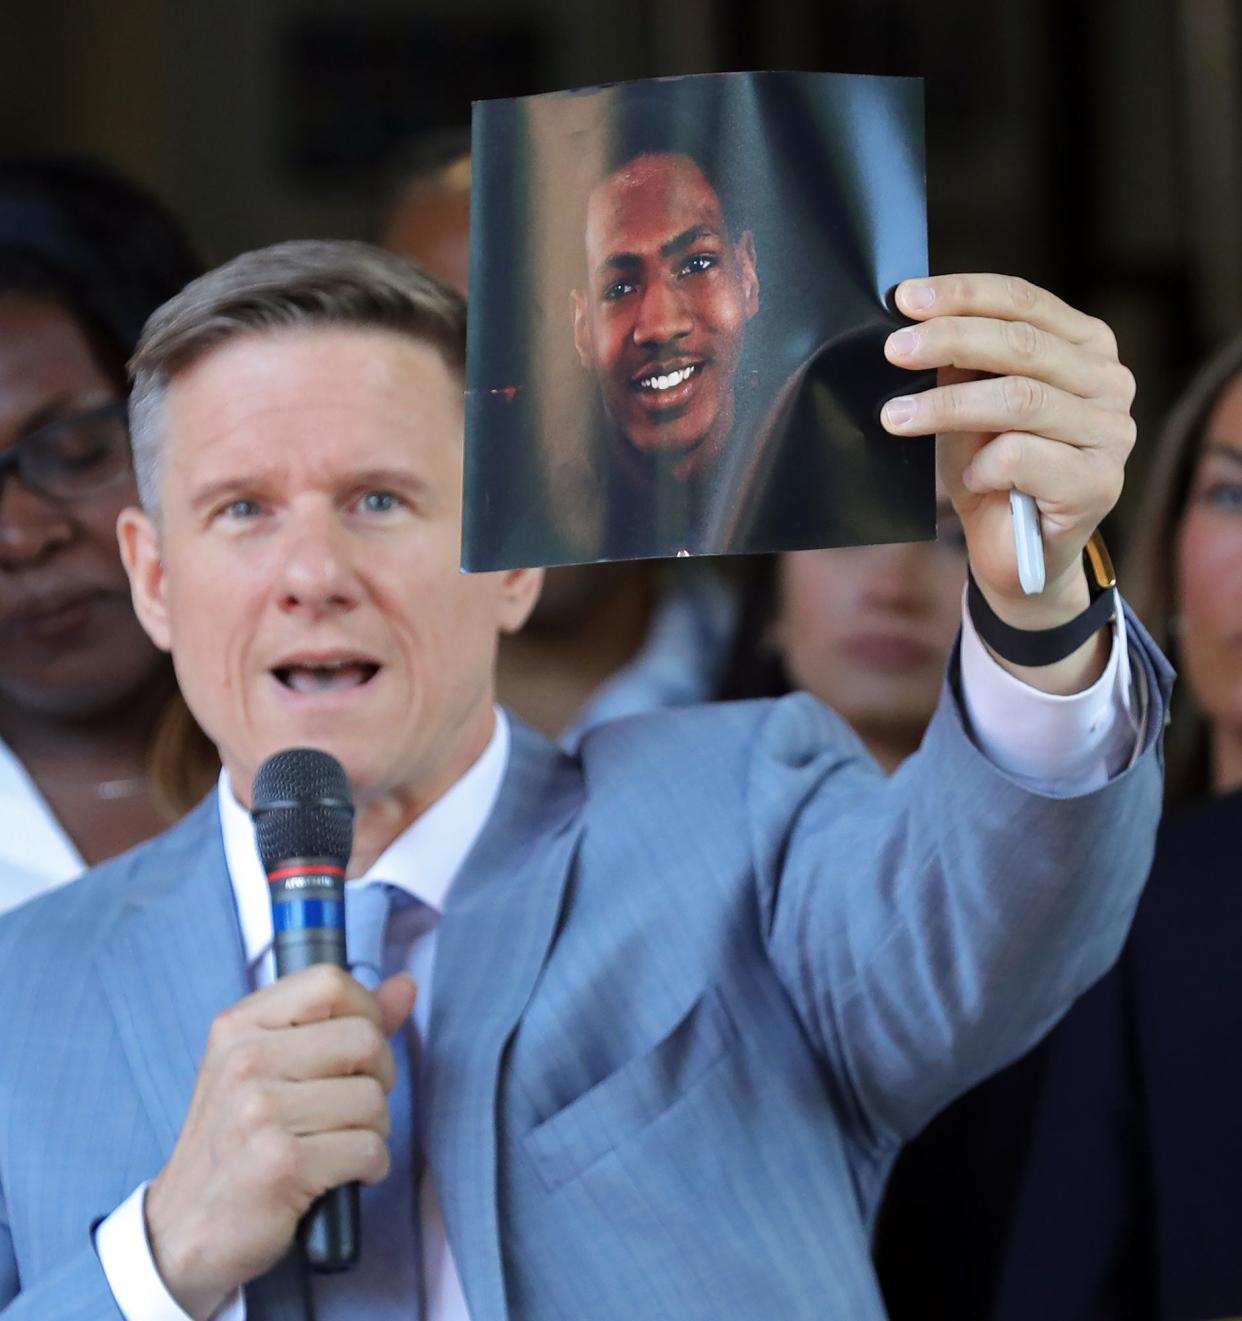 Attorney Bobby DiCello holds up a photograph of Jayland Walker, the man who was shot dead by Akron Police on Monday, June 25, as he speaks on behalf of the Walker family during a press conference at St. Ashworth Temple on Thursday.